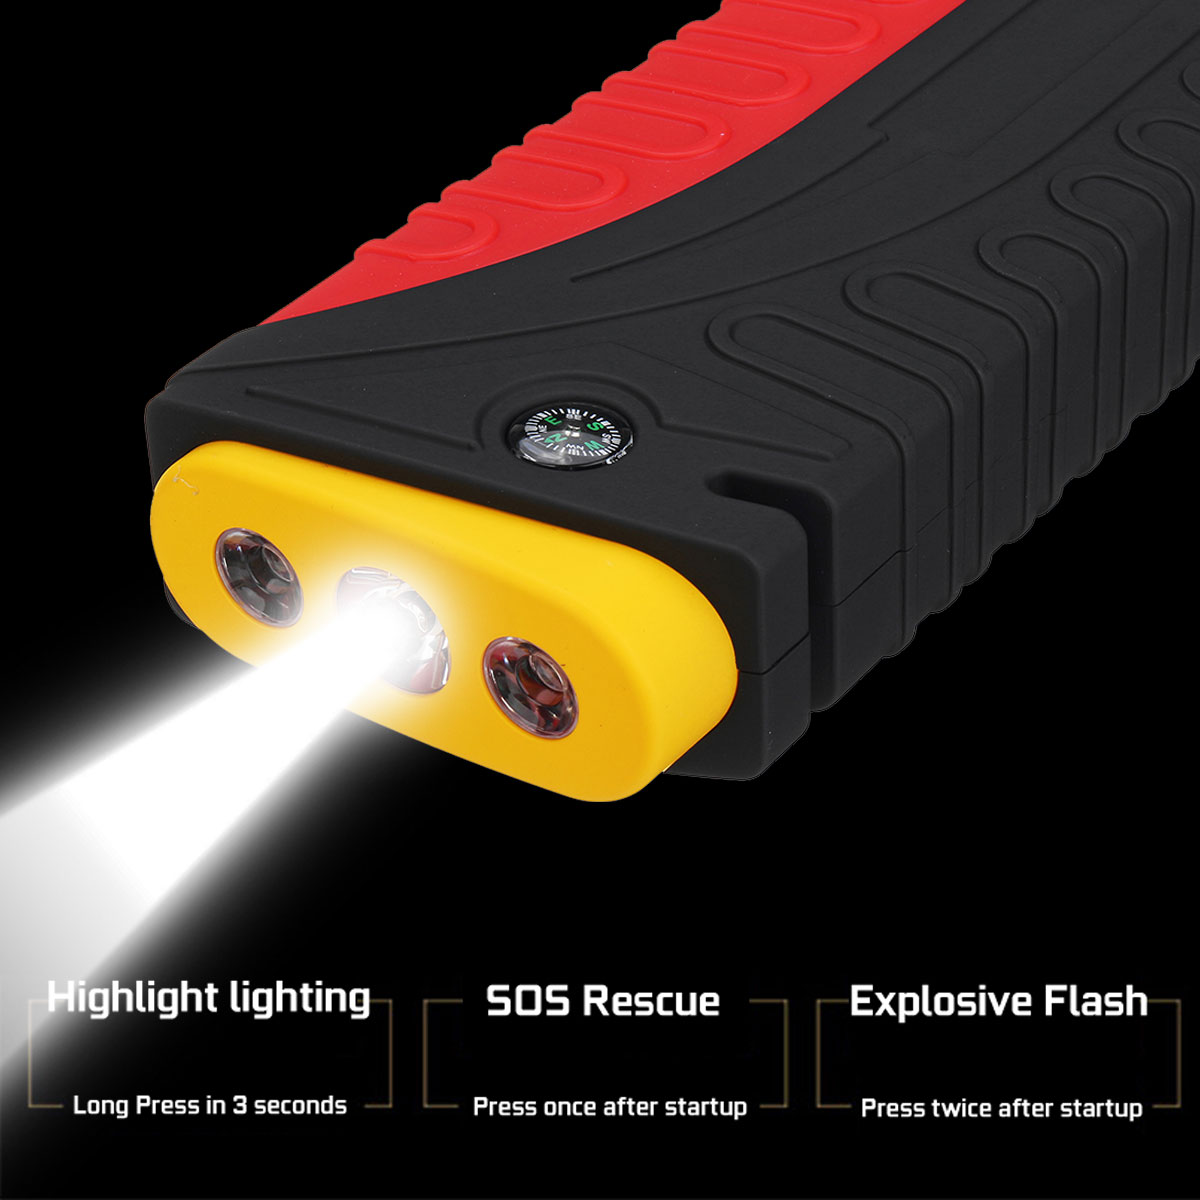 20000mAh-Car-Jump-Starter-Emergency-Battery-Booster-Waterproof-USB-LED-Flashlight-With-Safety-Hammer-1477000